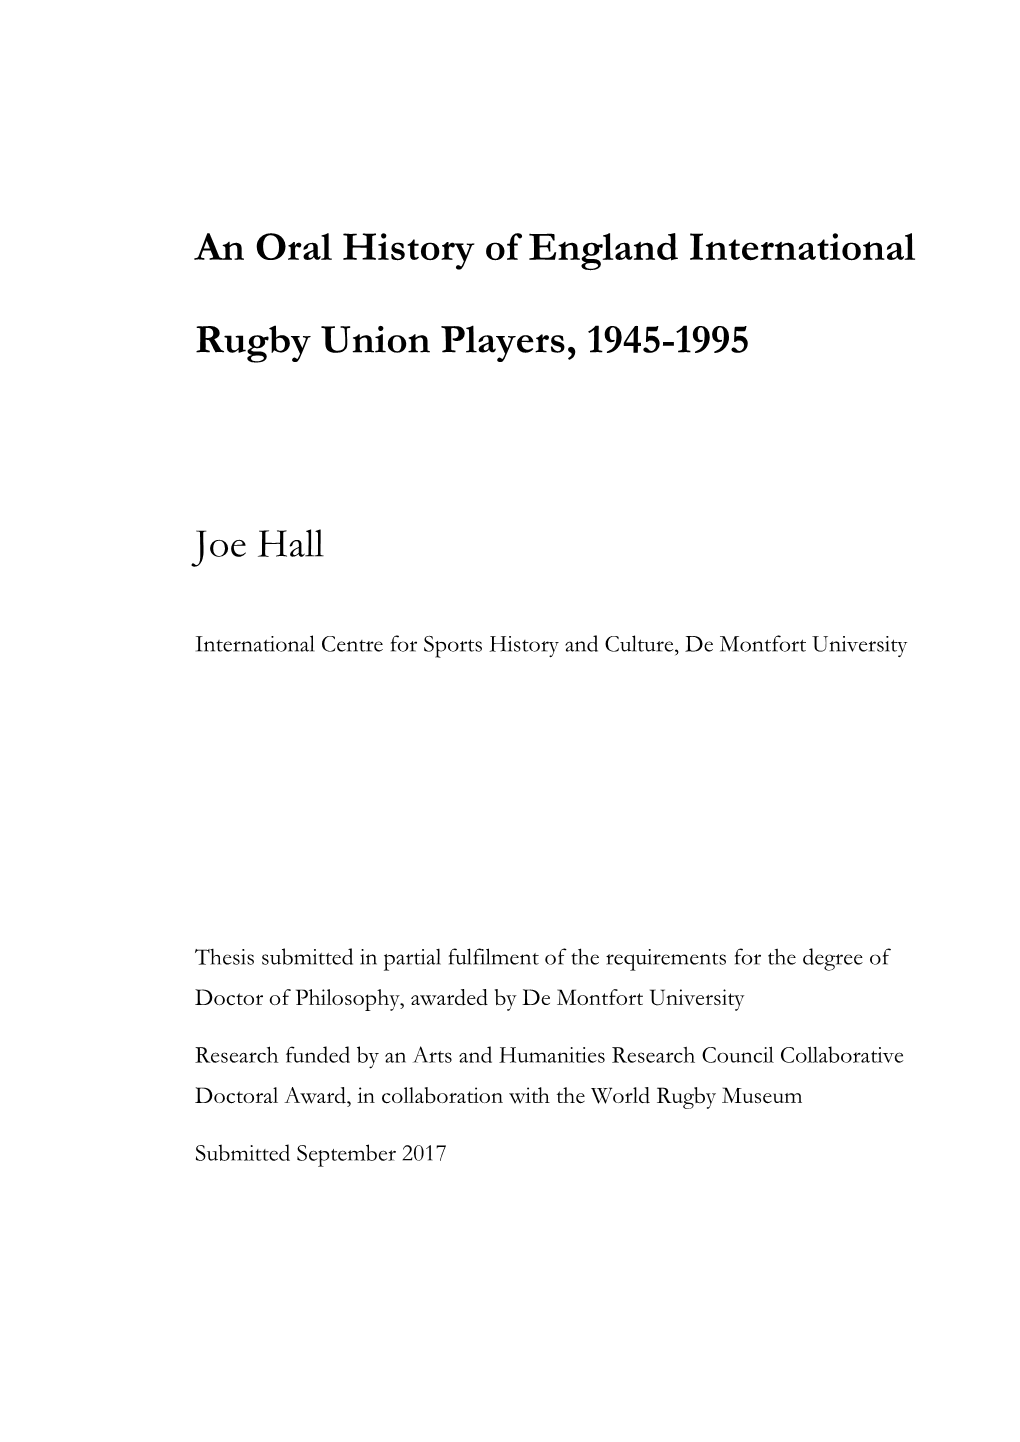 An Oral History of England International Rugby Union Players, 1945-1995 Joe Hall